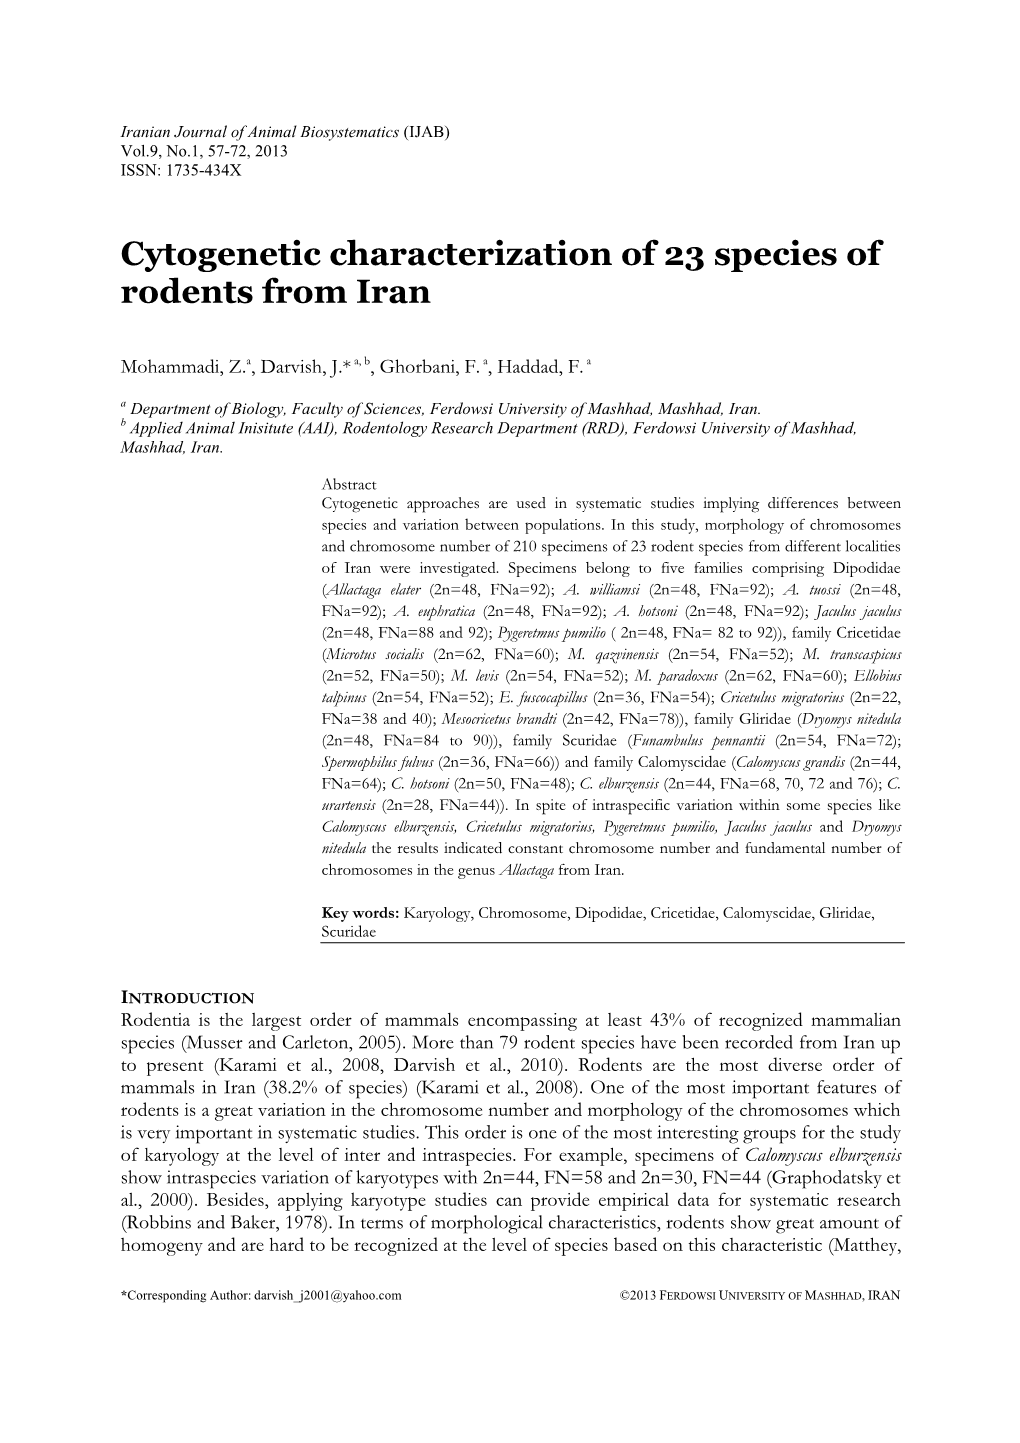 Cytogenetic Characterization of 23 Species of Rodents from Iran